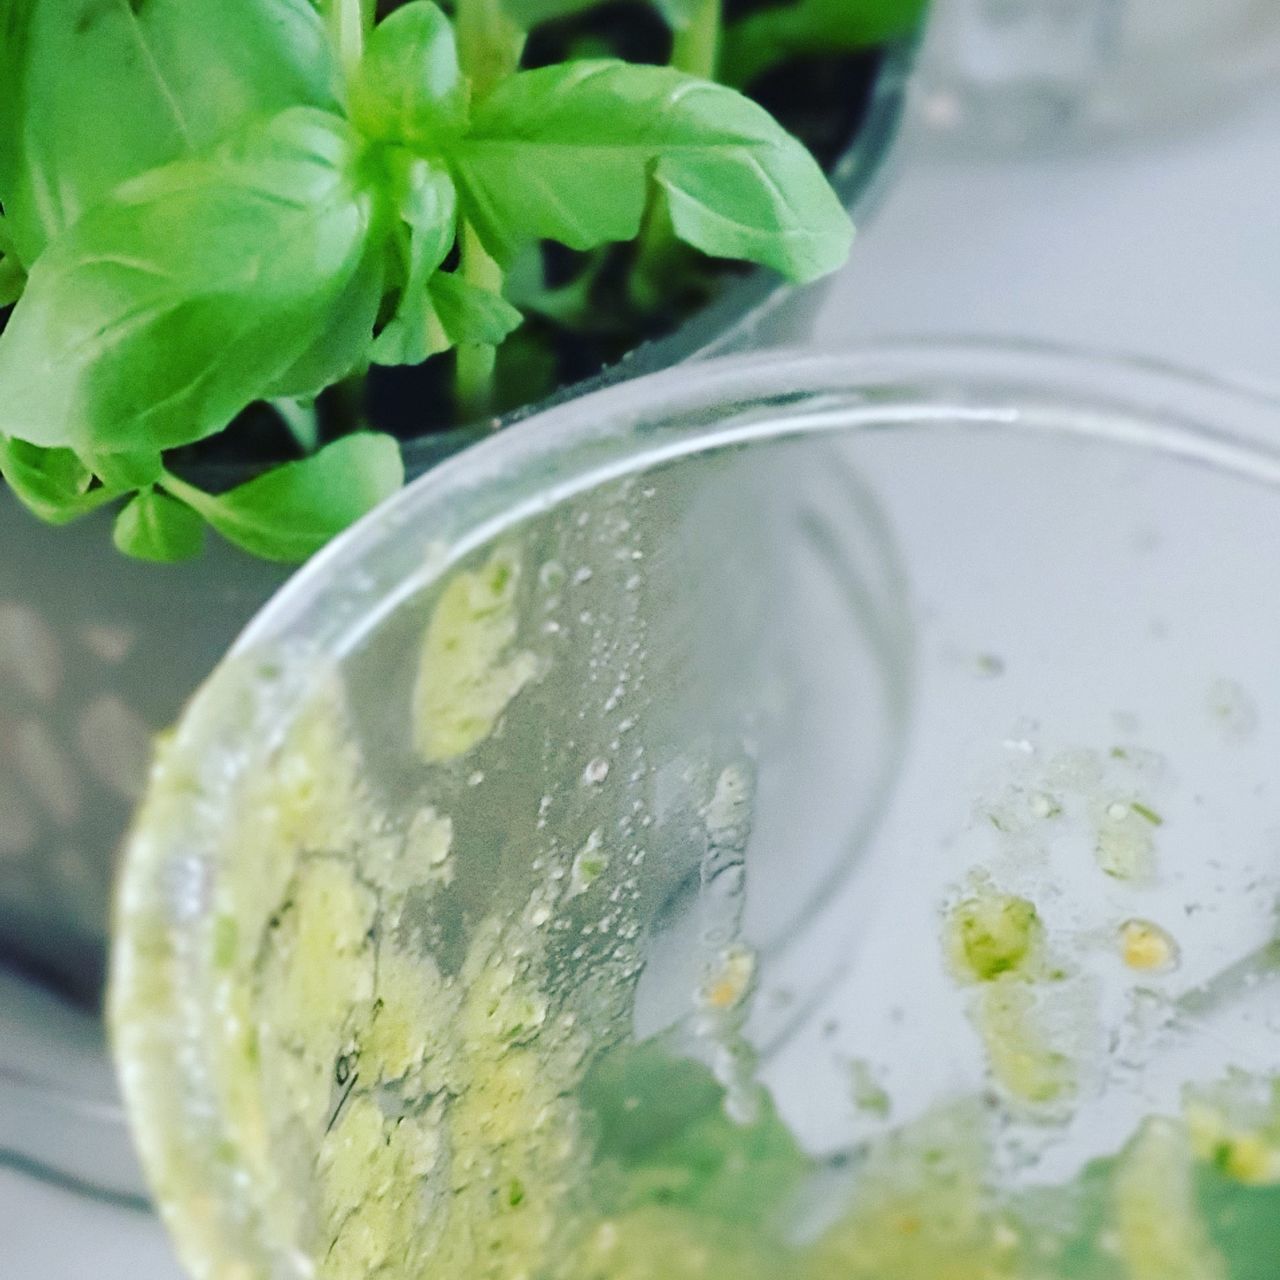 leaf, close-up, plant part, drink, plant, household equipment, nature, no people, drinking glass, indoors, water, glass, food and drink, selective focus, lemonade, freshness, glass - material, refreshment, food, herb, mint leaf - culinary, tonic water